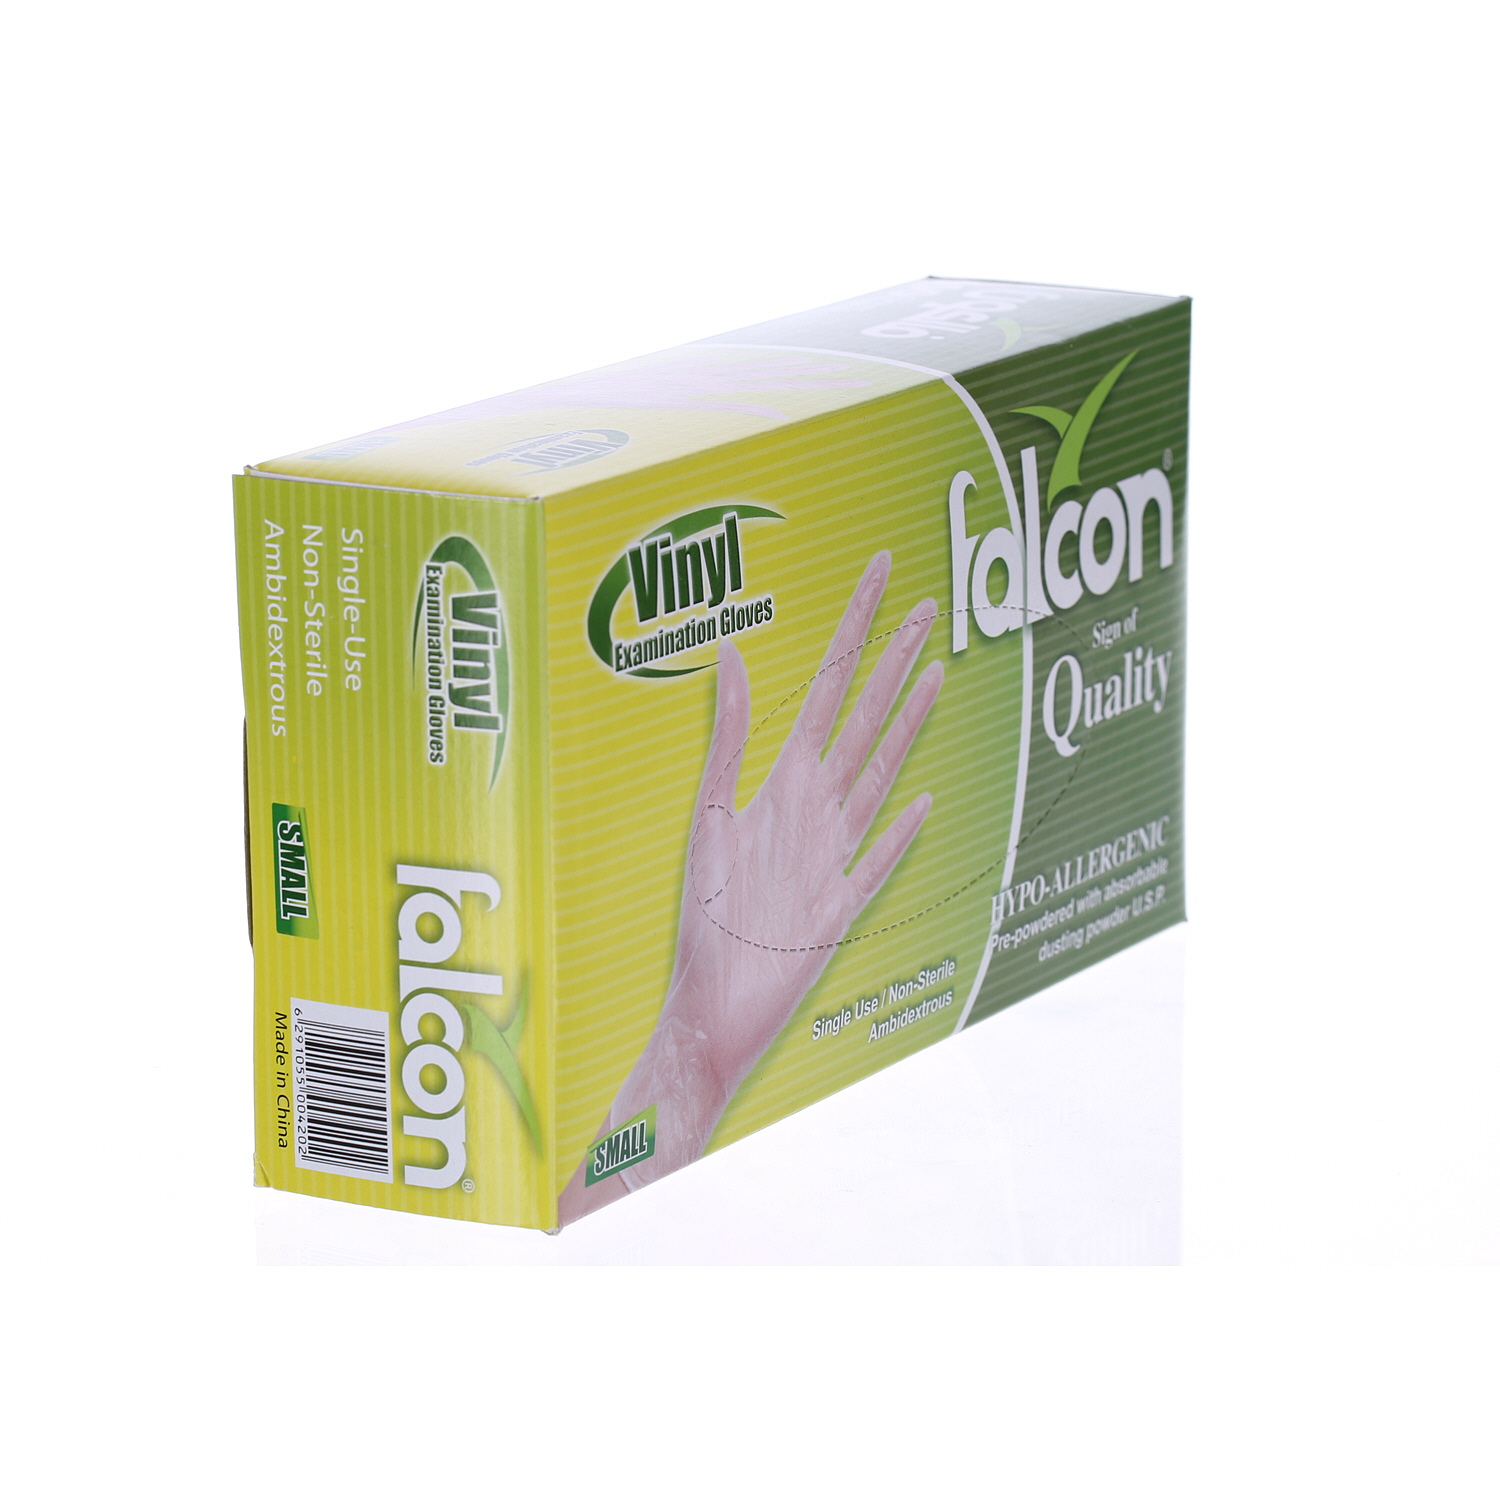 Falcon Powder Free Gloves Small 100 Pack